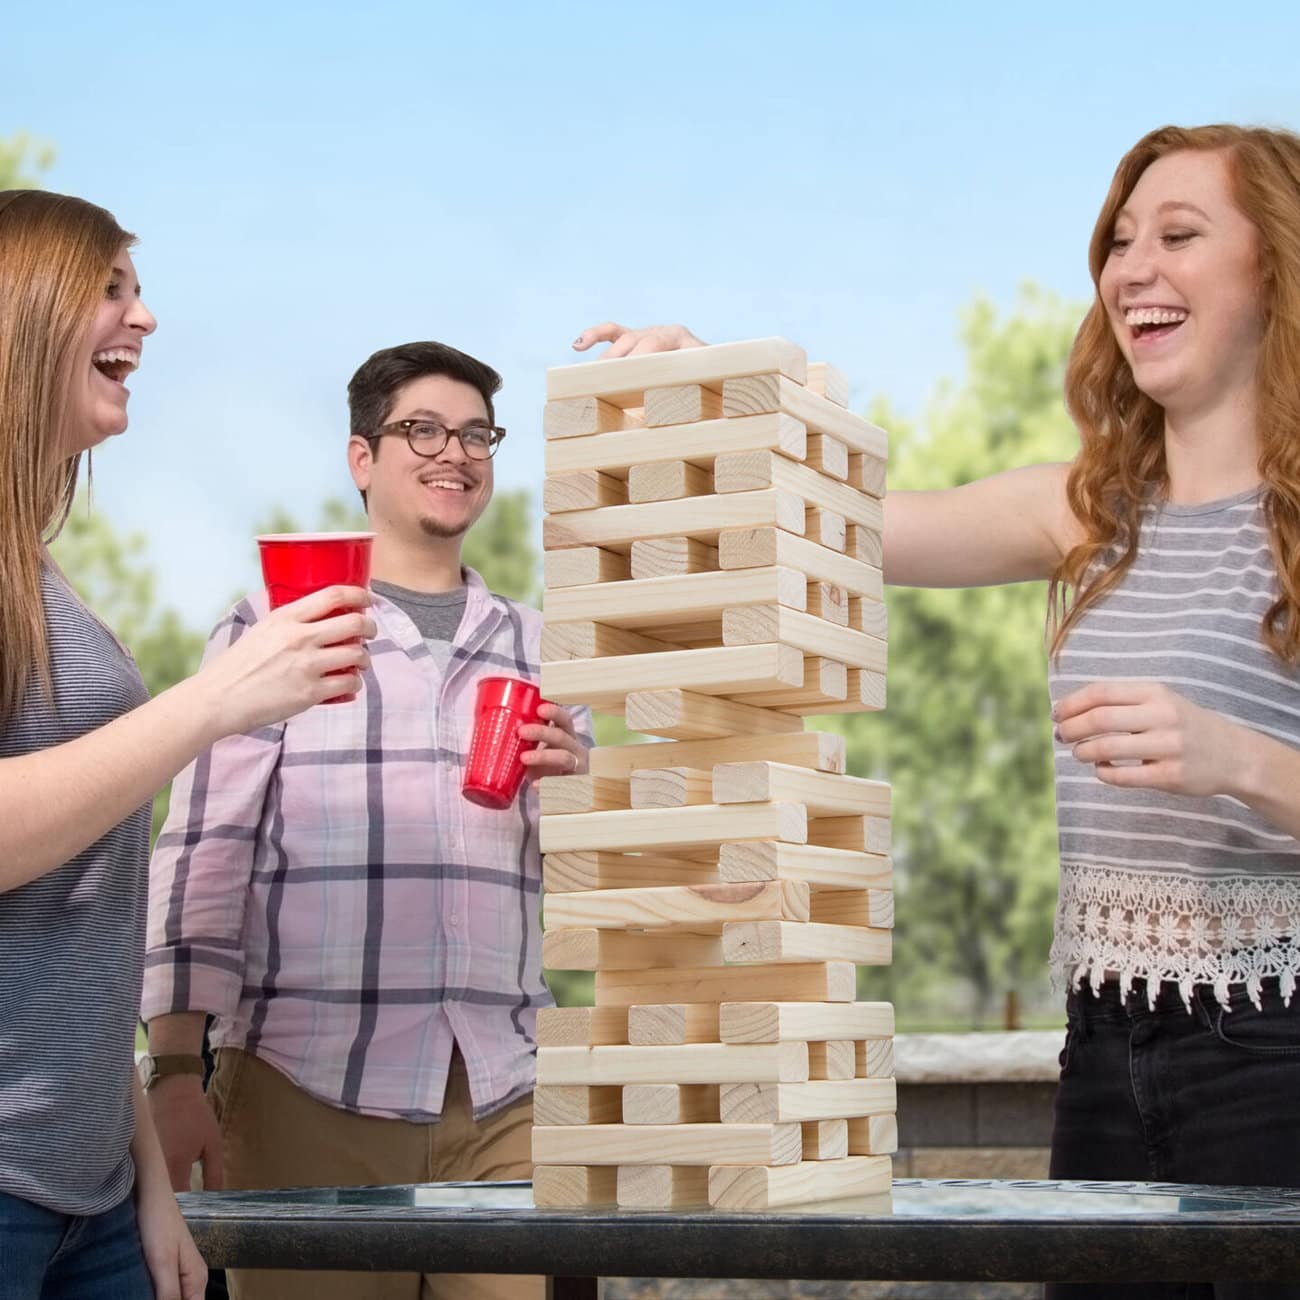 Walmart Nontraditional Giant Wooden Blocks Tower Stacking Game